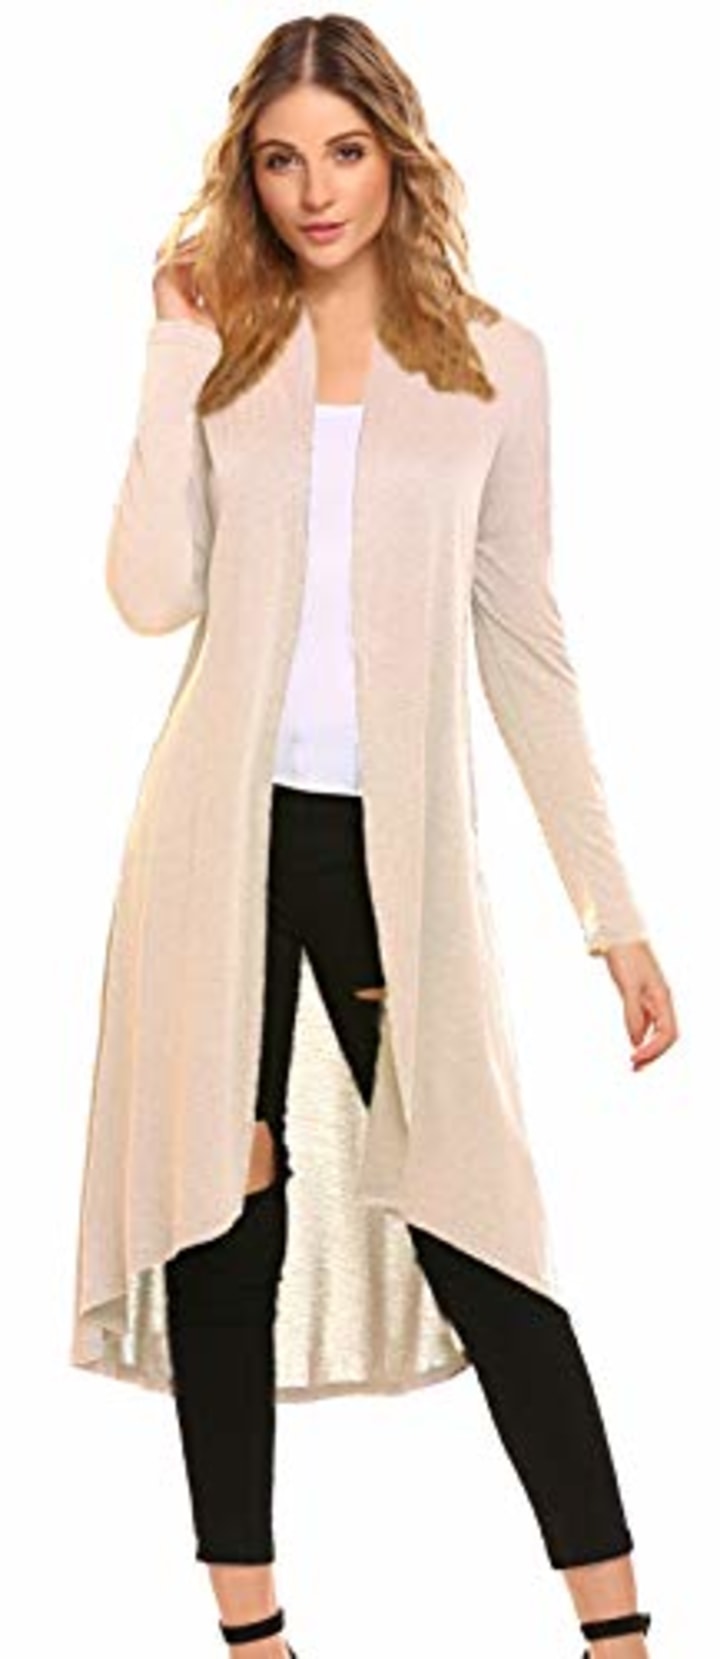 Open Front Knit Cardigans for Women Lightweight Cover-up Long Sleeve Cardigan Sweaters(US S (4-6), C-Beige)